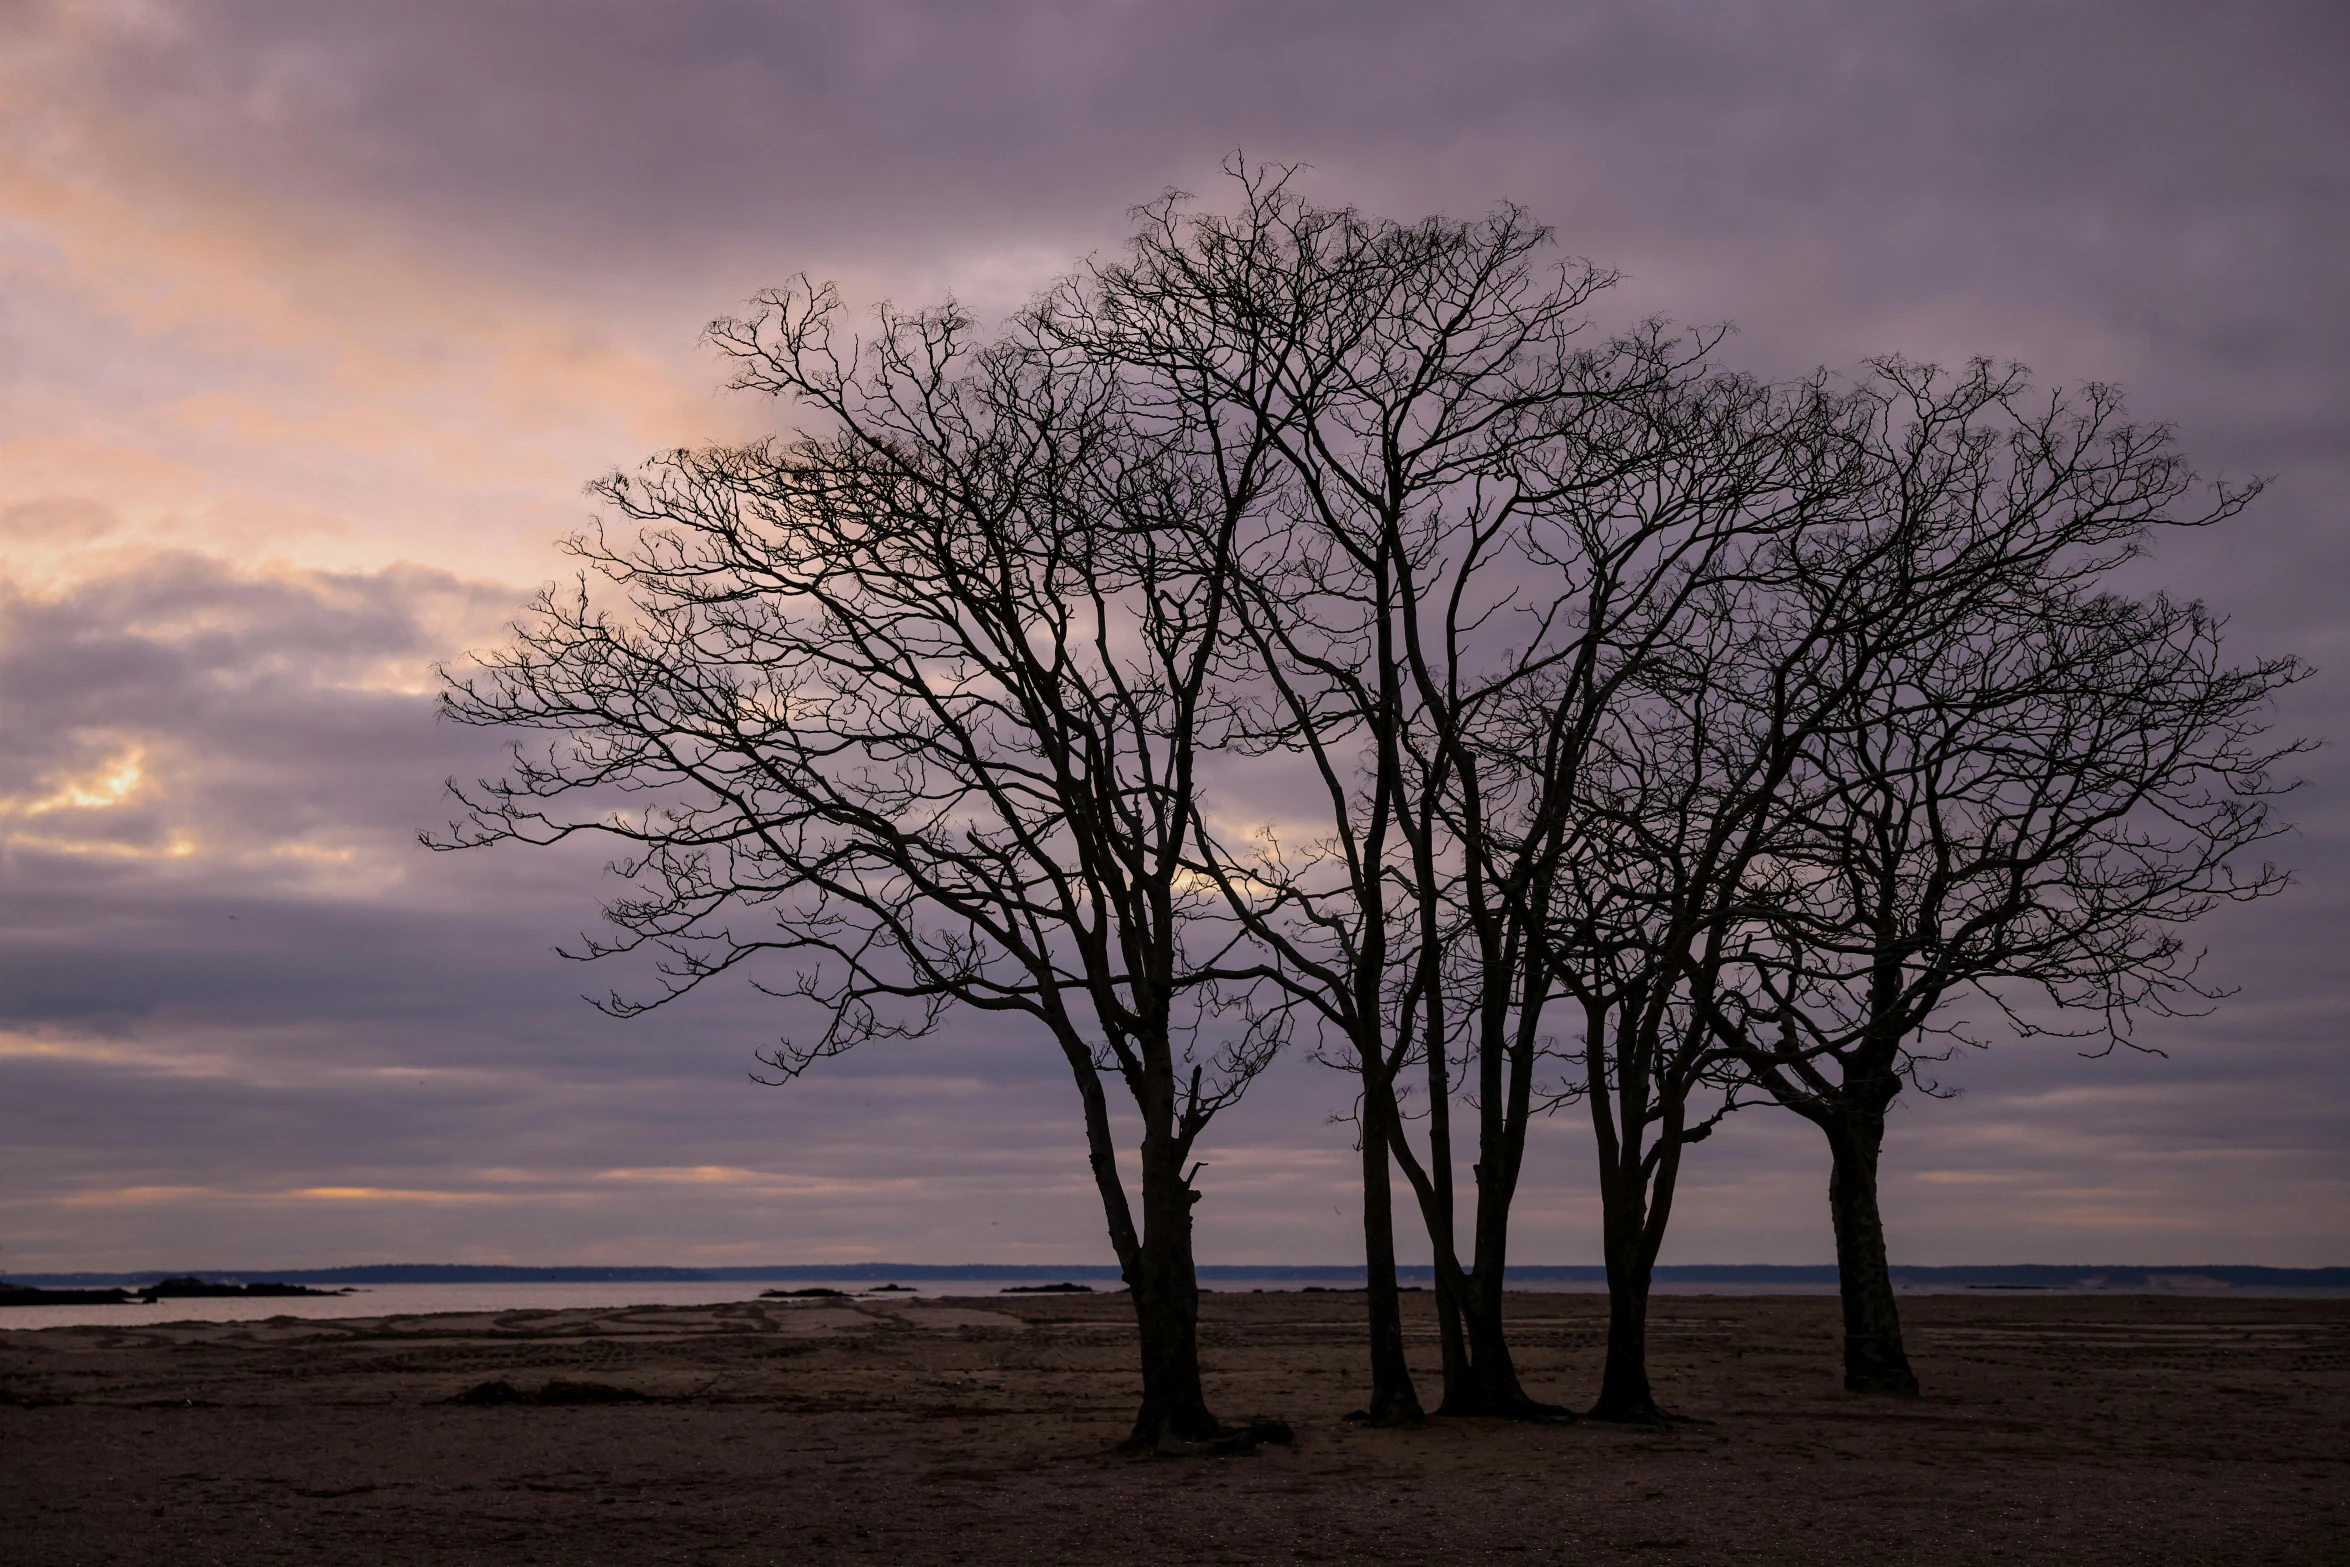 two trees against the cloudy sky on a beach